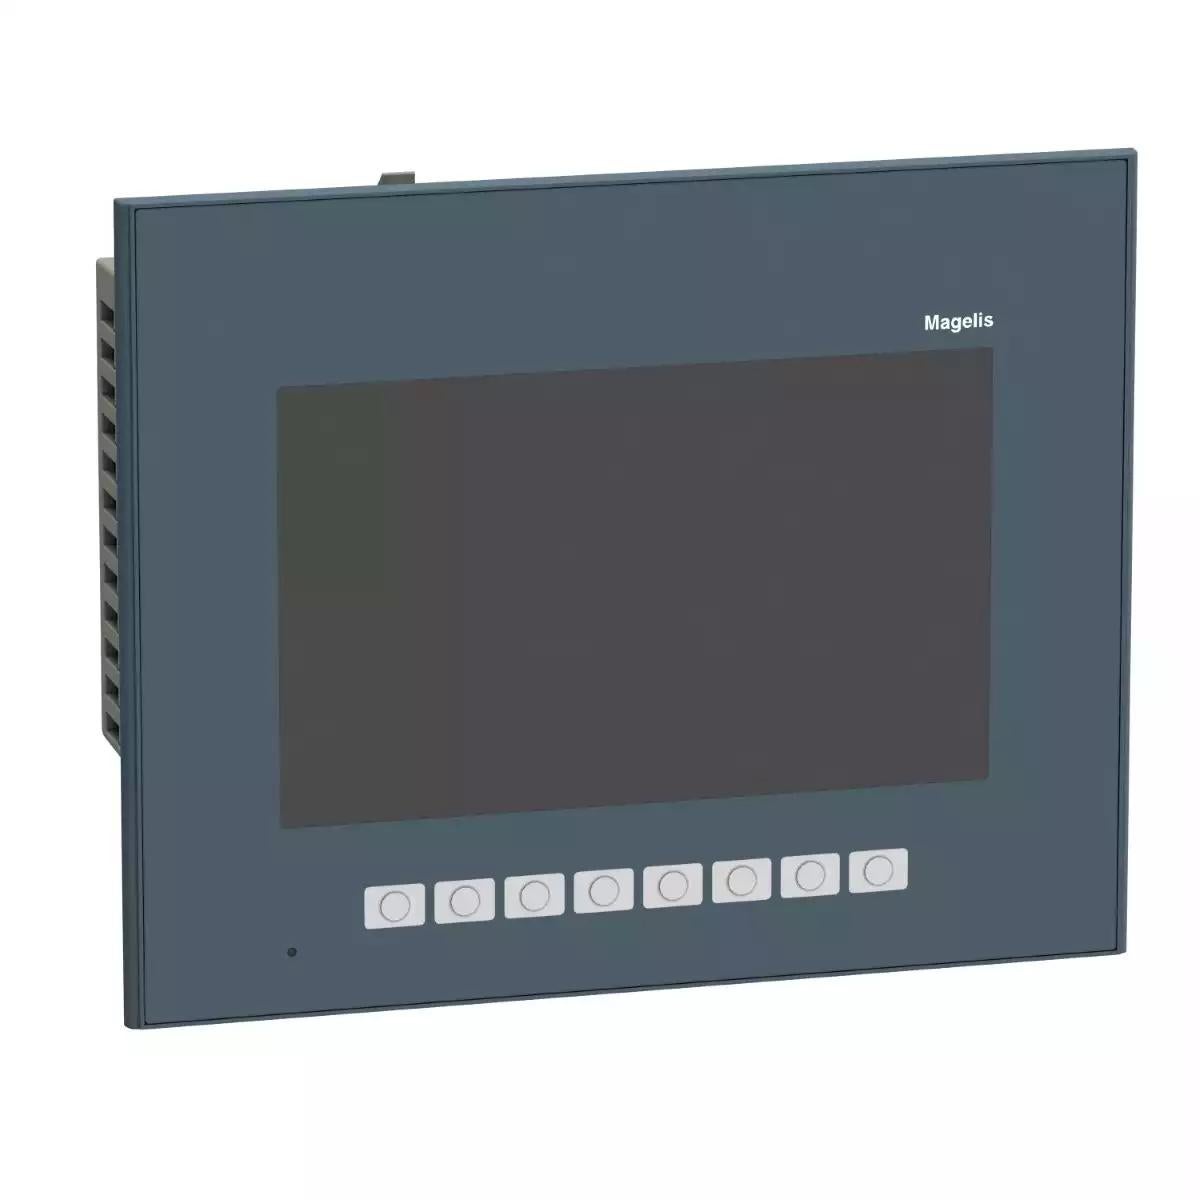 Advanced touchscreen panel, Harmony GTO, 7.0 Color Touch WVGA TFT, logo removed